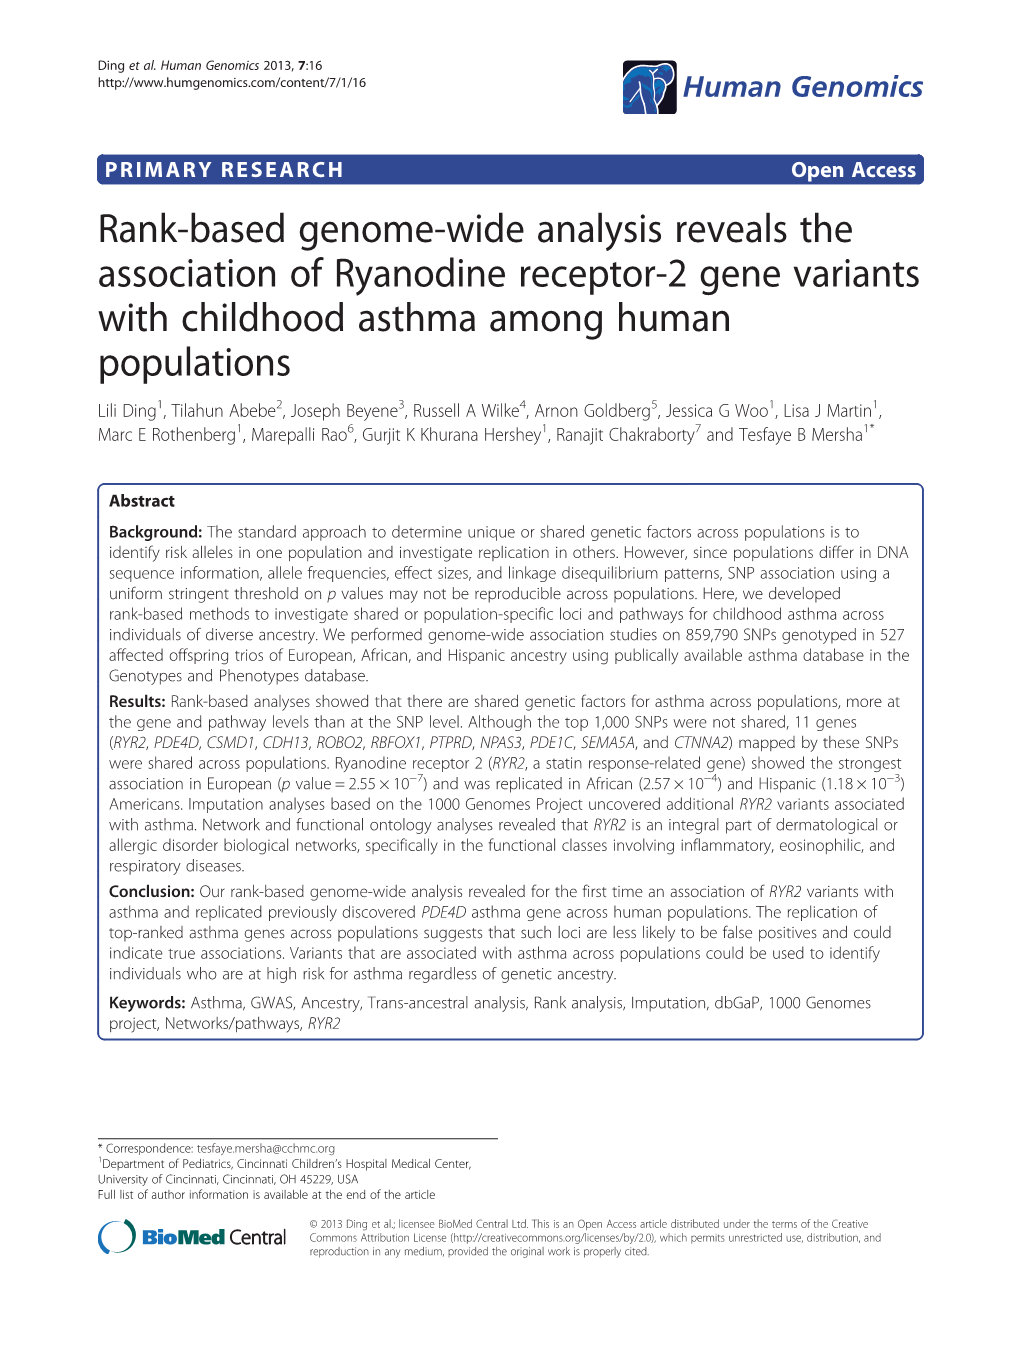 Rank-Based Genome-Wide Analysis Reveals the Association Of